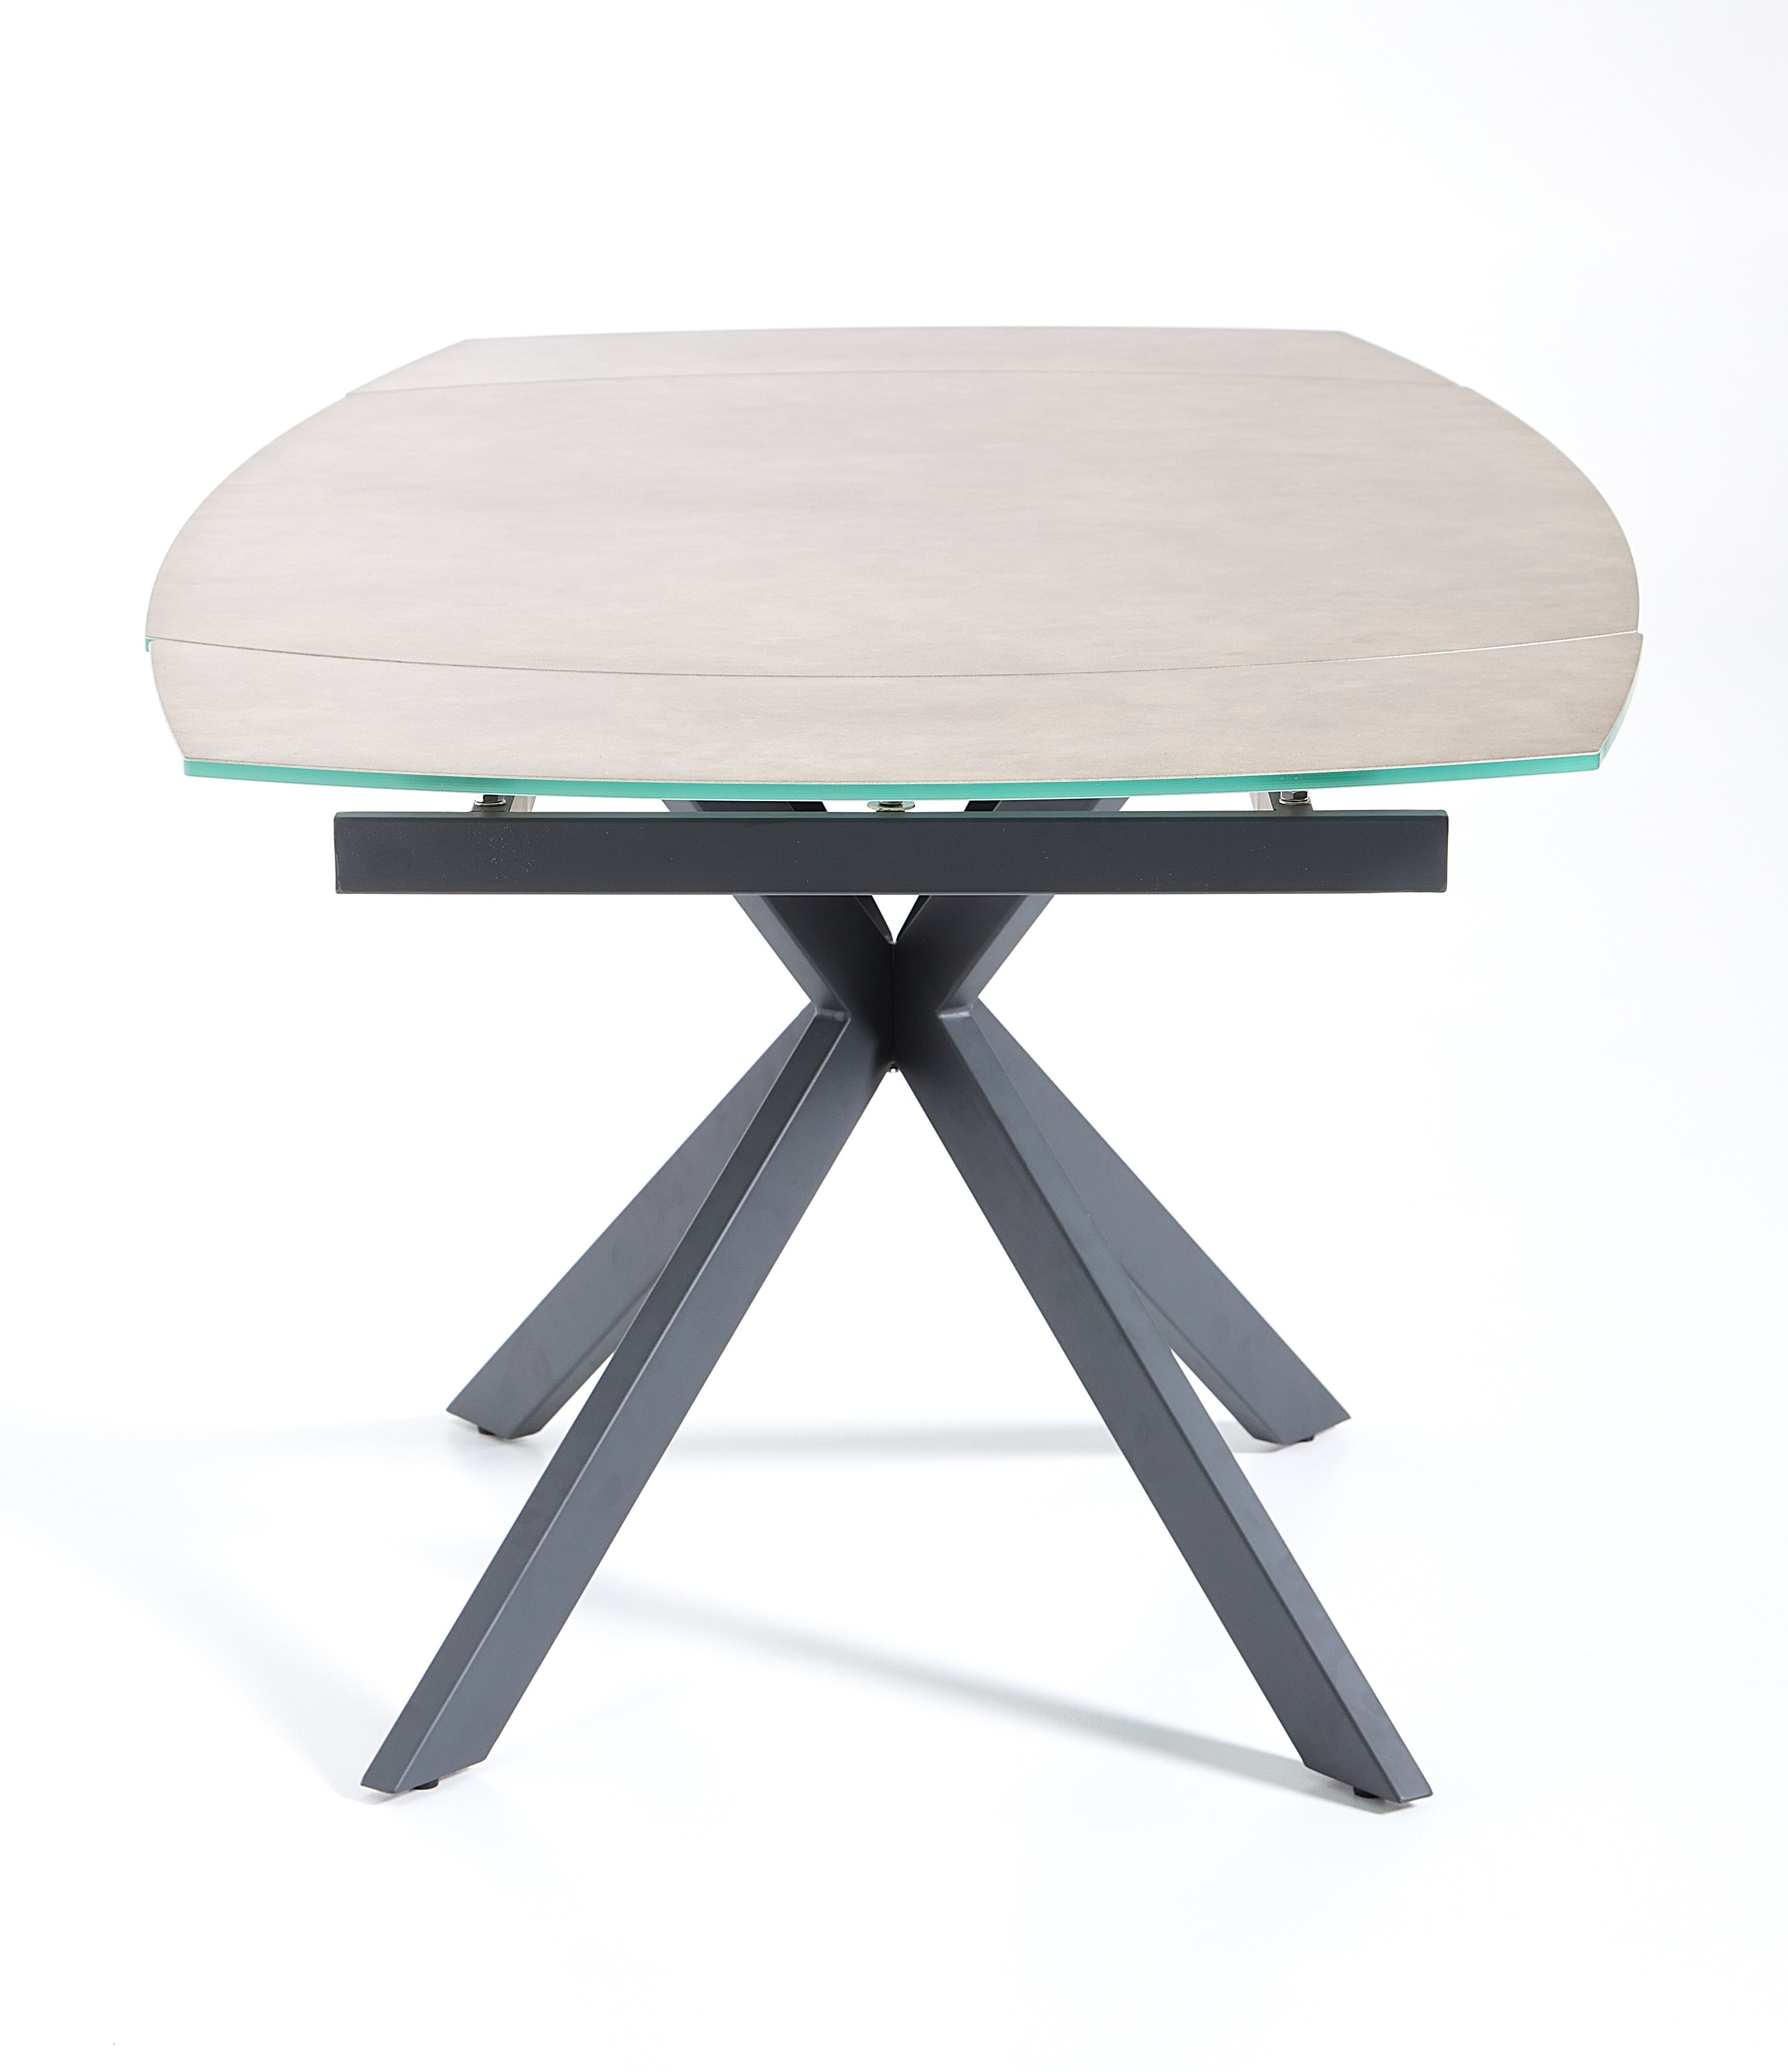 Tietro 140-200cm Extend Dining Table and 4 Teal Carter Dining Chairs - Bundle Deal